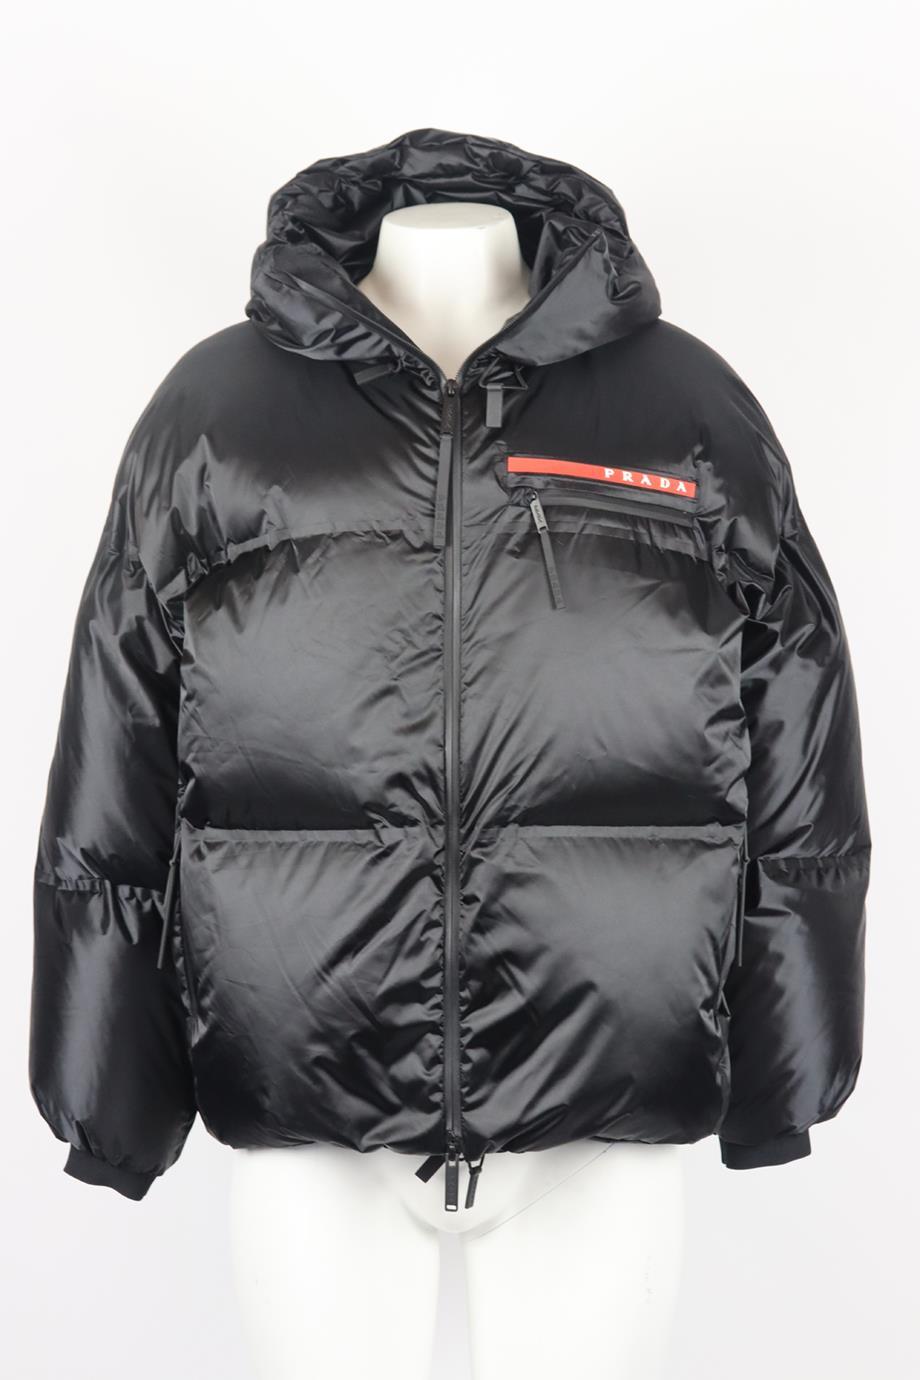 Prada oversized hooded quilted shell down jacket. Black. Long sleeve, crewneck. Zip fastening at front. Comes with suit carrier. Size: XSmall (UK 6, US 2, FR 34, IT 38). Shoulder to shoulder: 22.5 in. Bust: 56 in. Waist: 53 in. Hips: 48 in. Length: